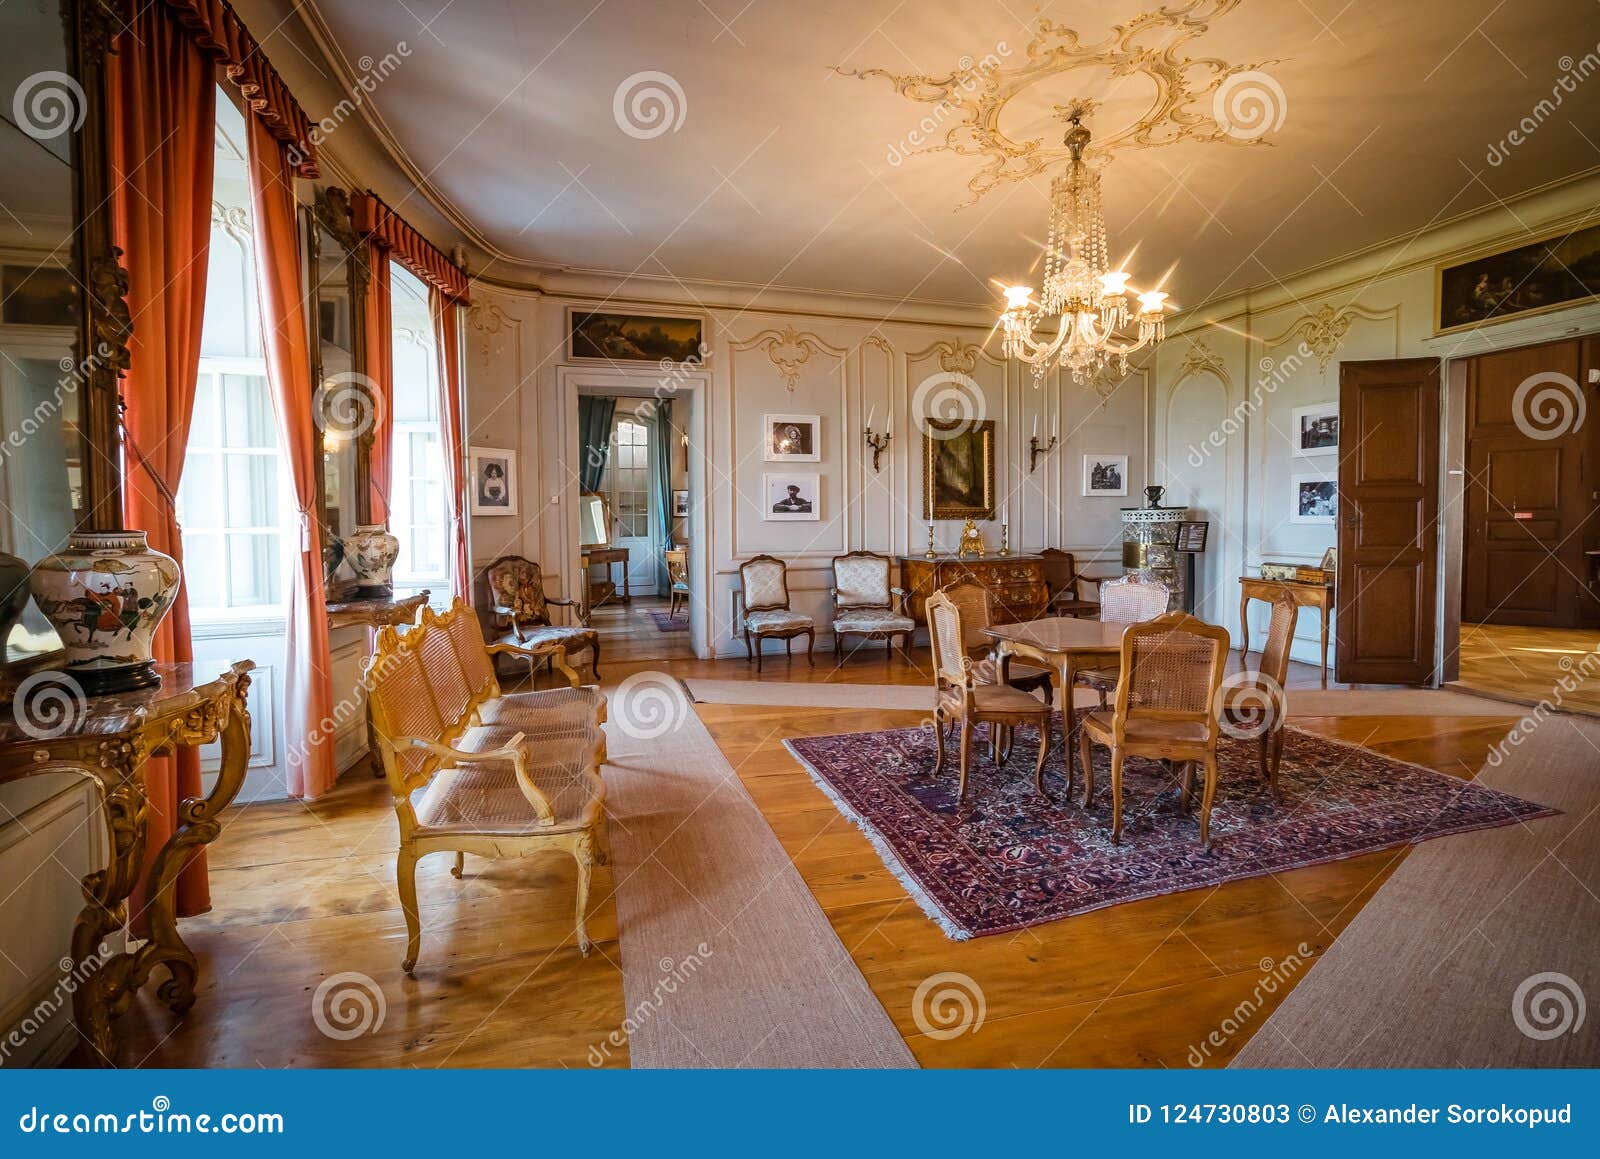 https://thumbs.dreamstime.com/z/beautiful-rich-classic-interior-xix-century-old-house-beautiful-rich-classic-interior-xix-century-124730803.jpg